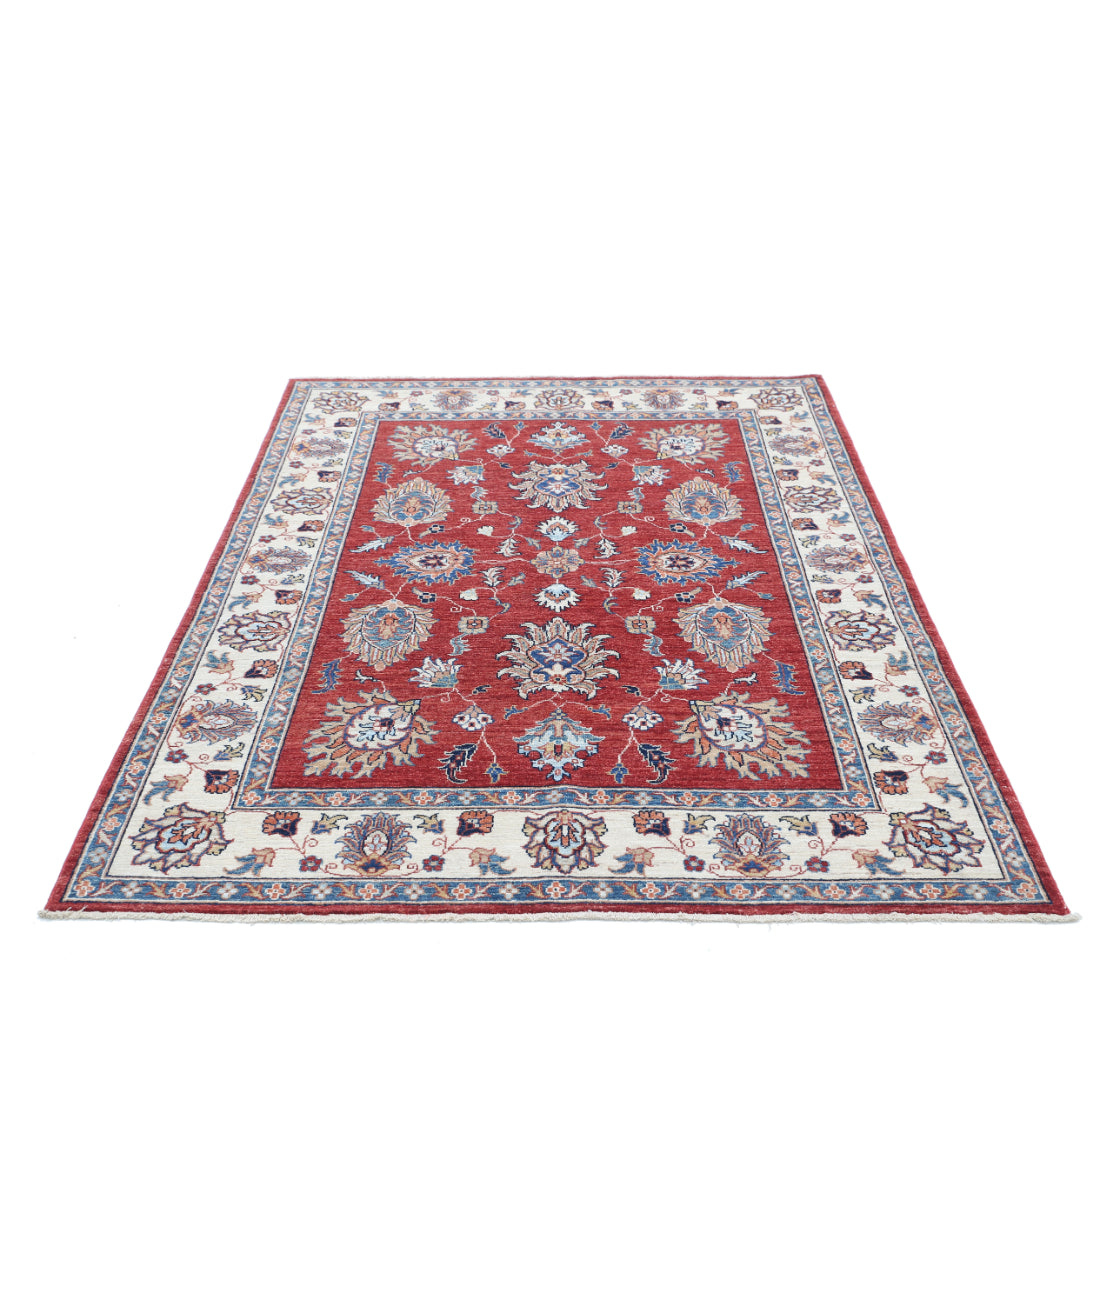 Hand Knotted Ziegler Farhan Wool Rug - 4'10'' x 6'6'' 4'10'' x 6'6'' (145 X 195) / Red / Ivory